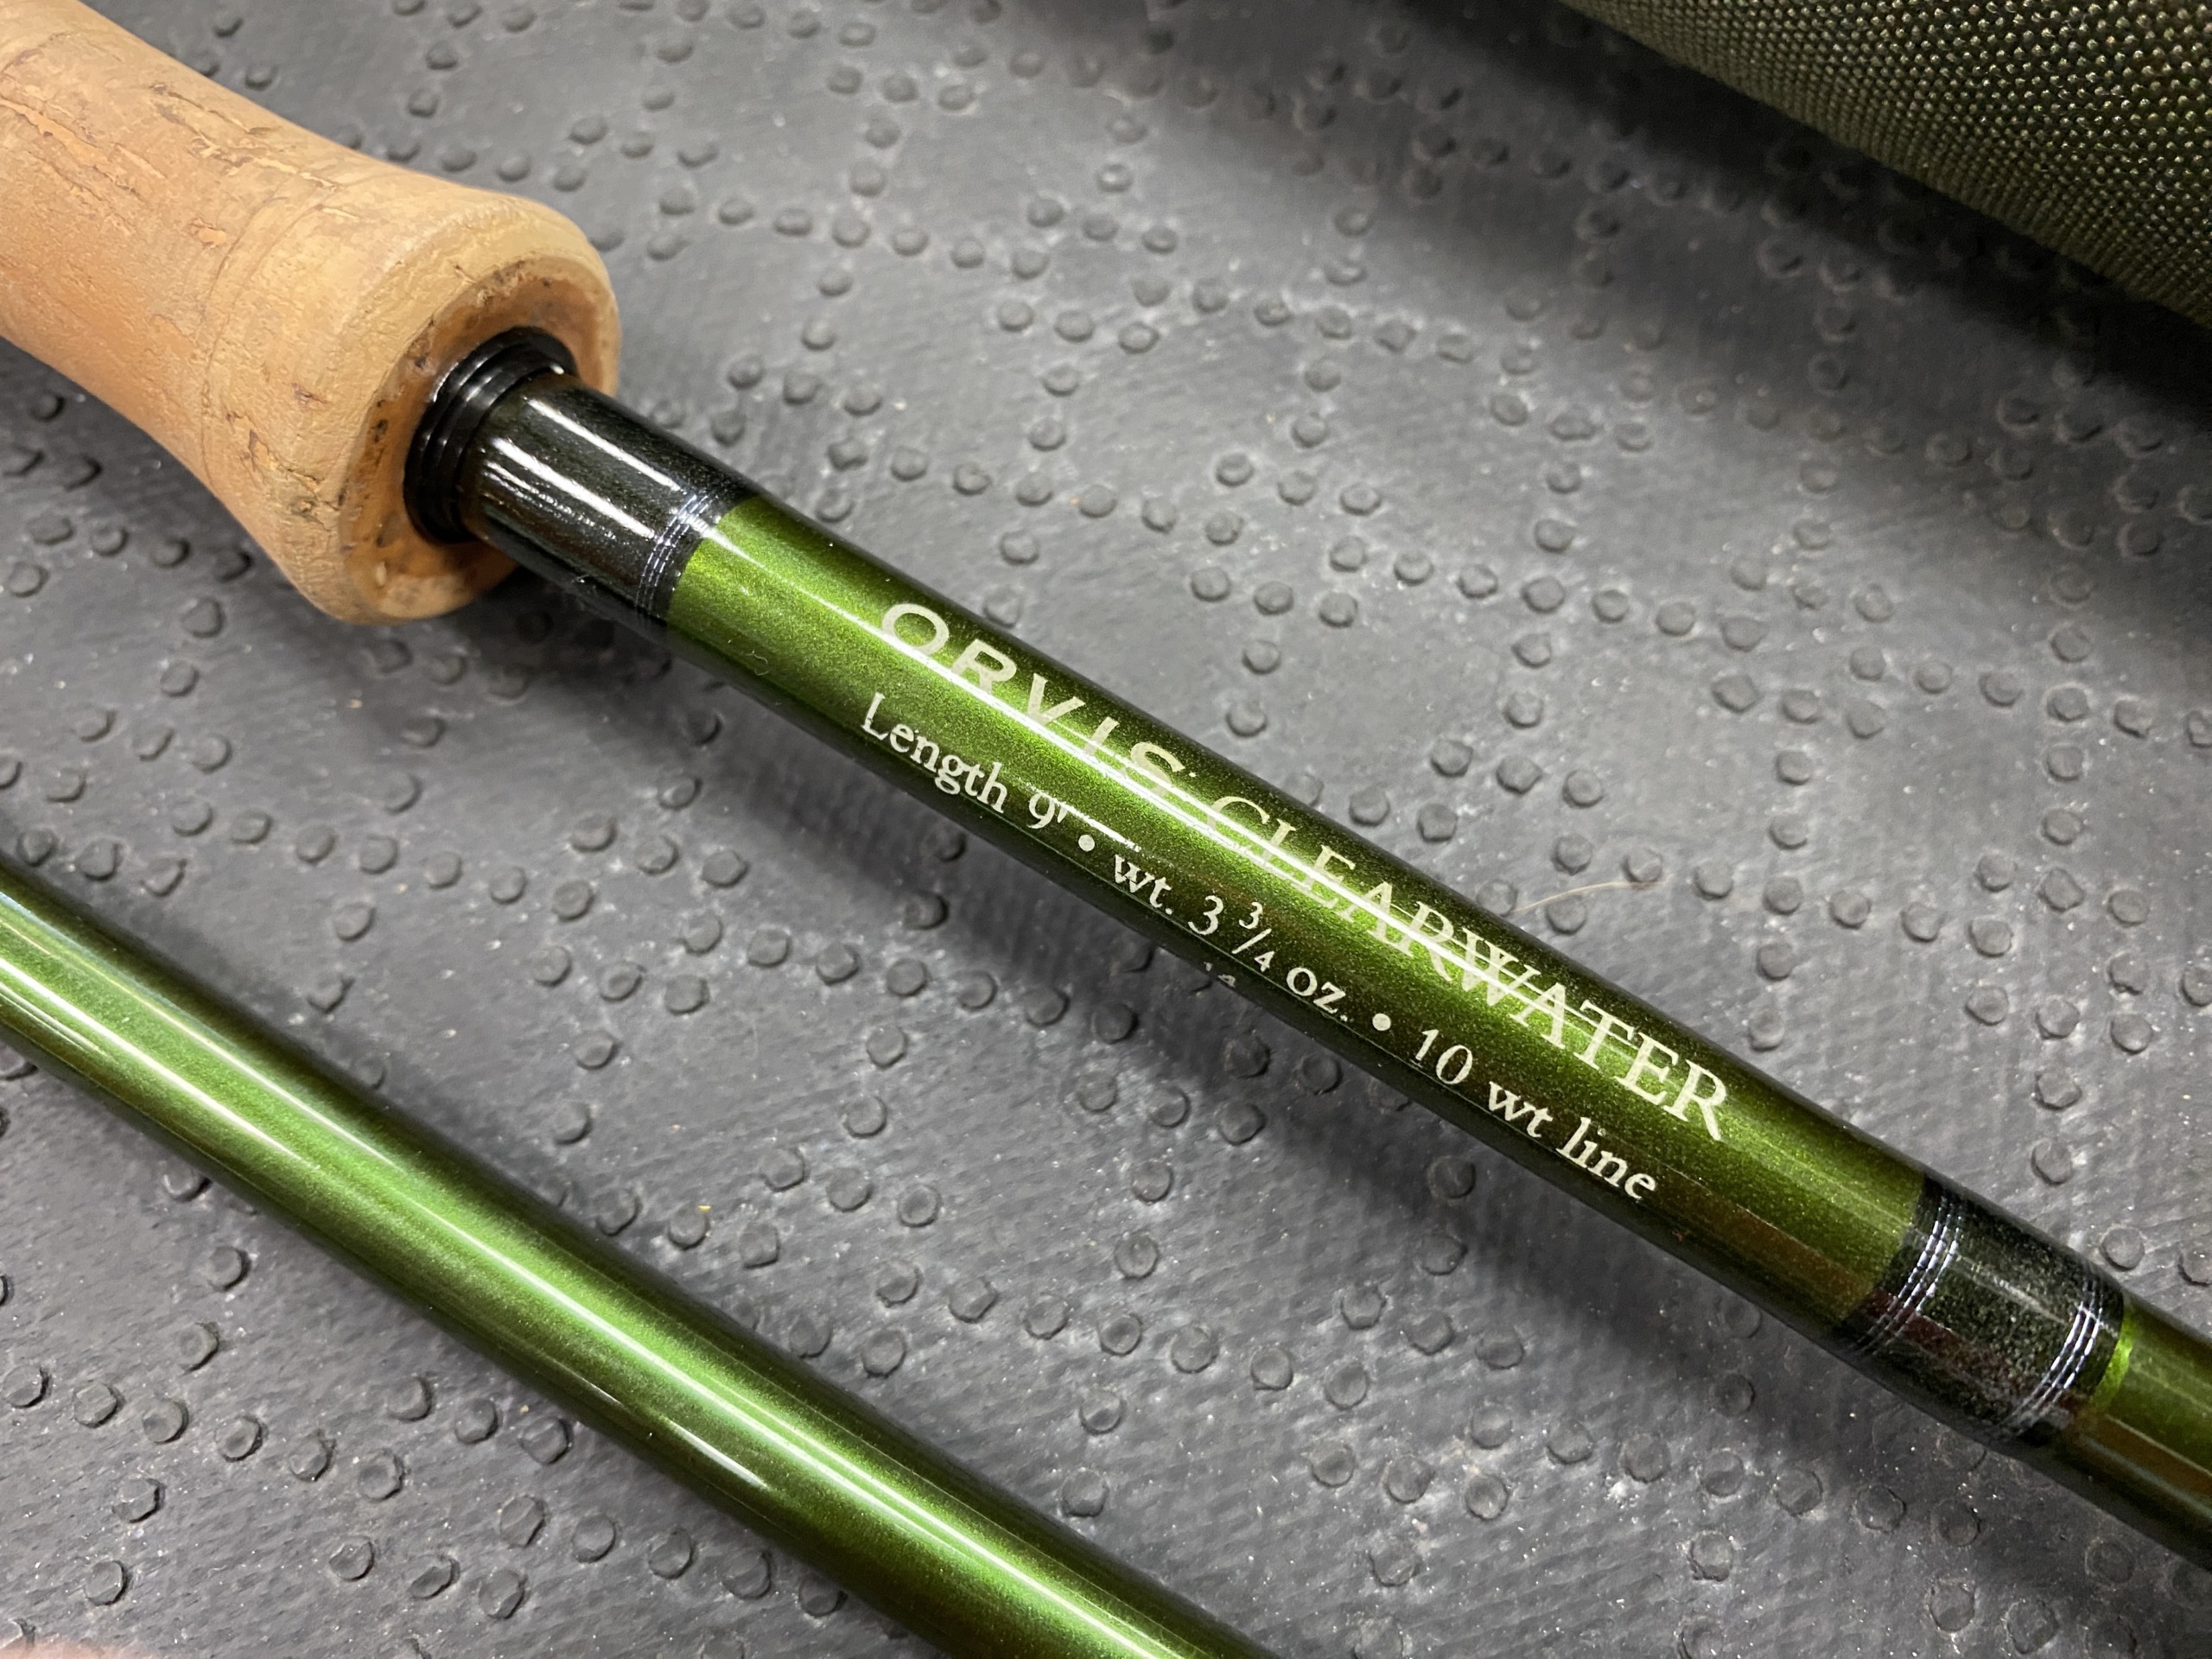 Orvis Clearwater - 910-4 - 9' - 10WT - 4Pc Fly Rod C/W Tube - LIKE NEW! - $200